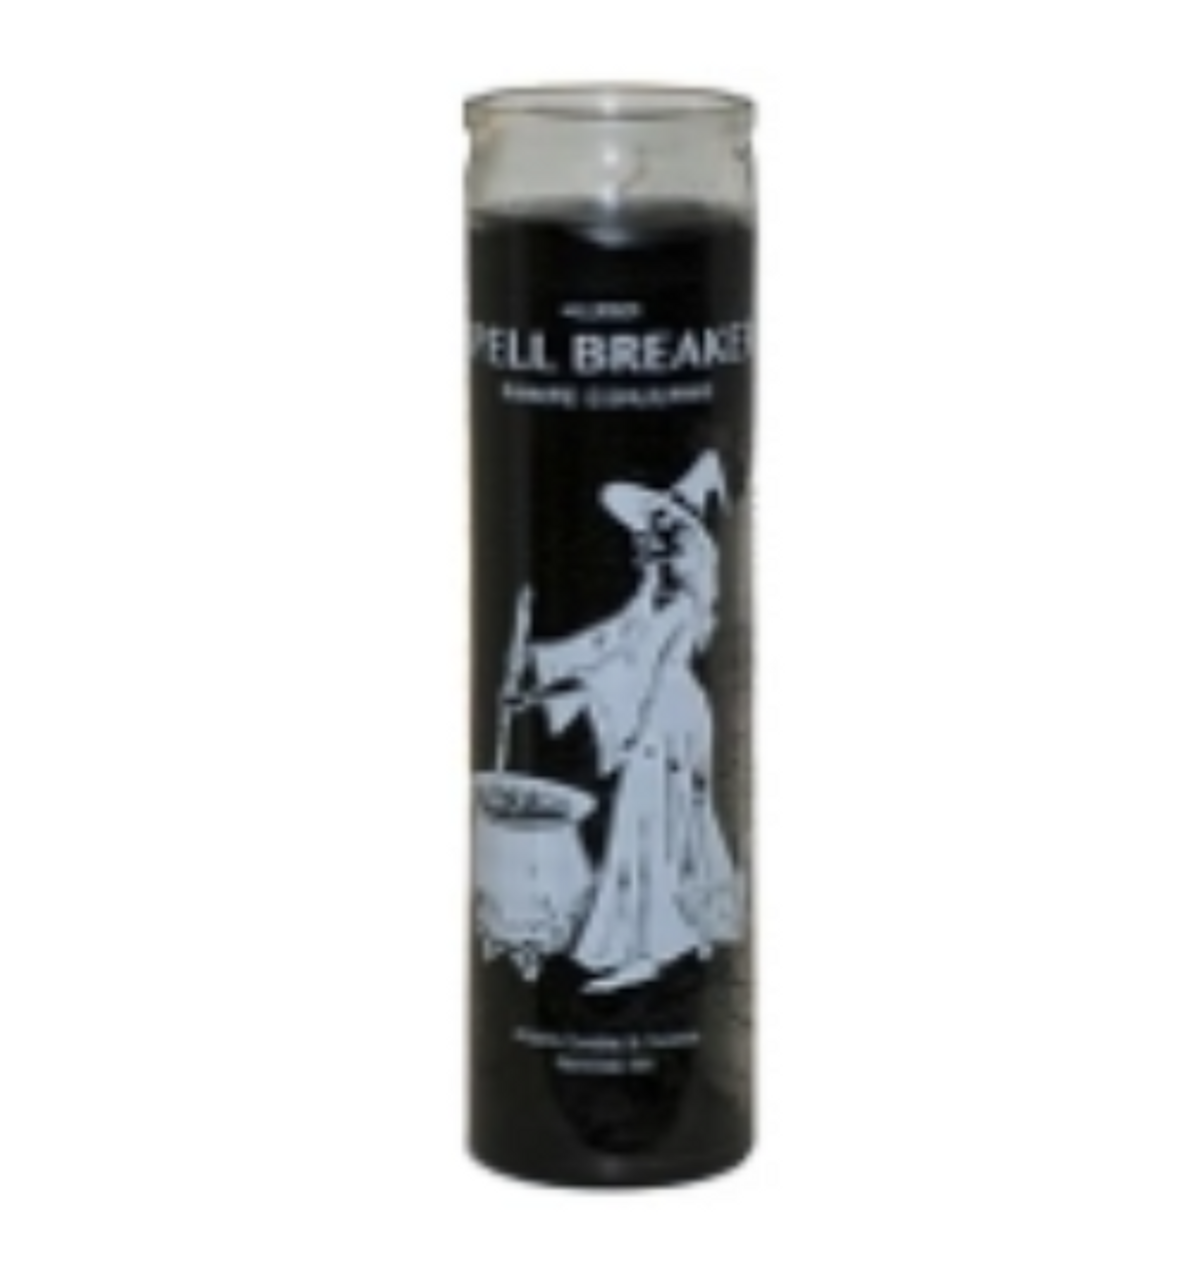 7 Day Candle Spell Breaker Black